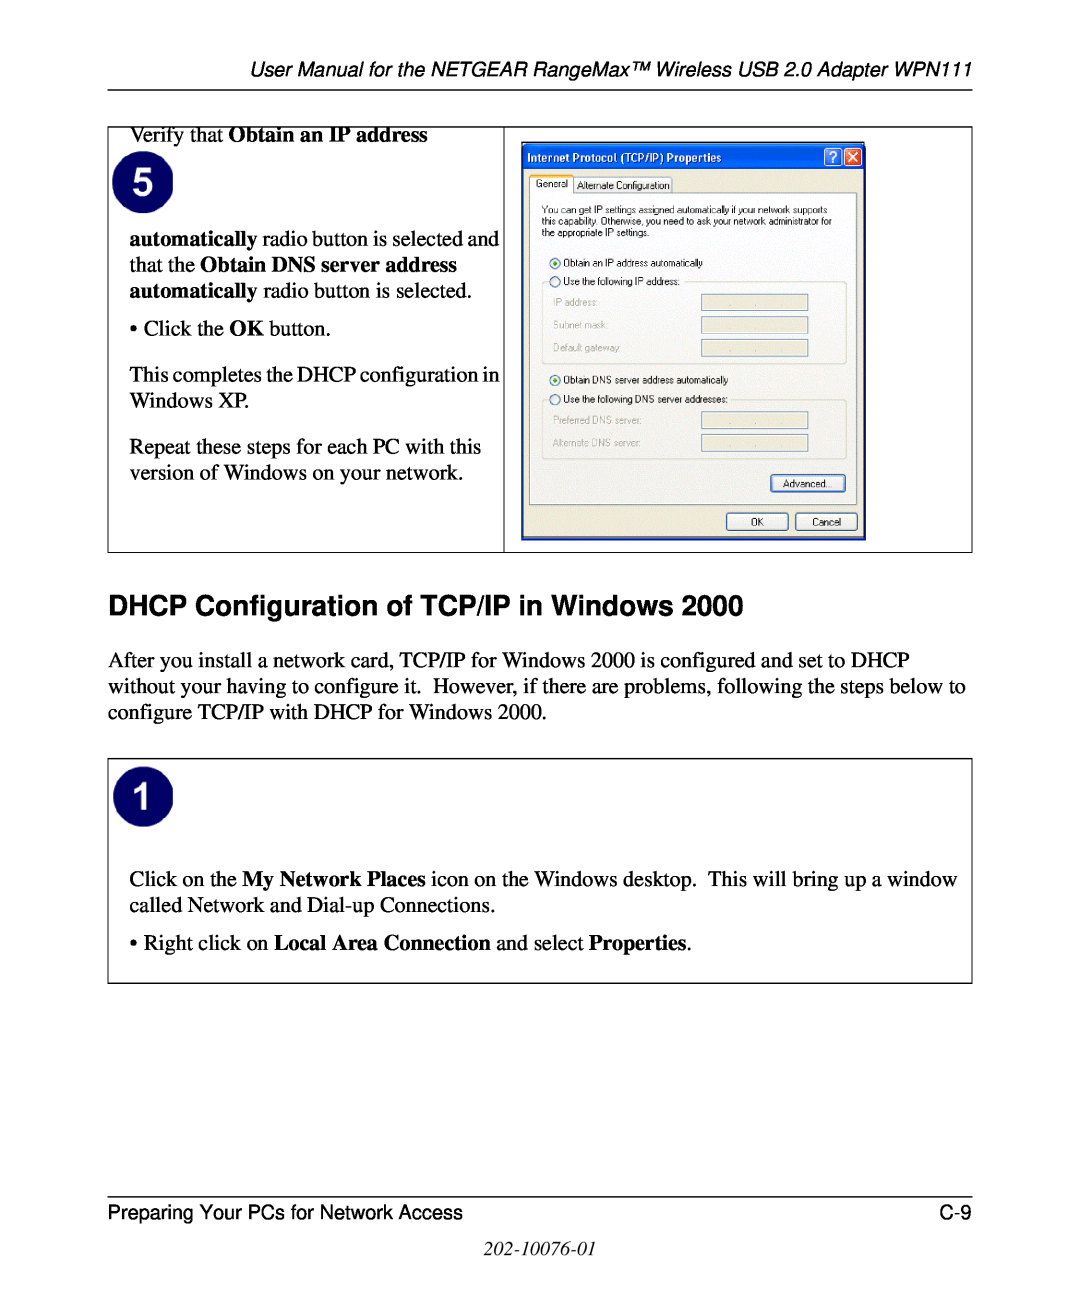 NETGEAR WPN111 user manual DHCP Configuration of TCP/IP in Windows, Verify that Obtain an IP address 